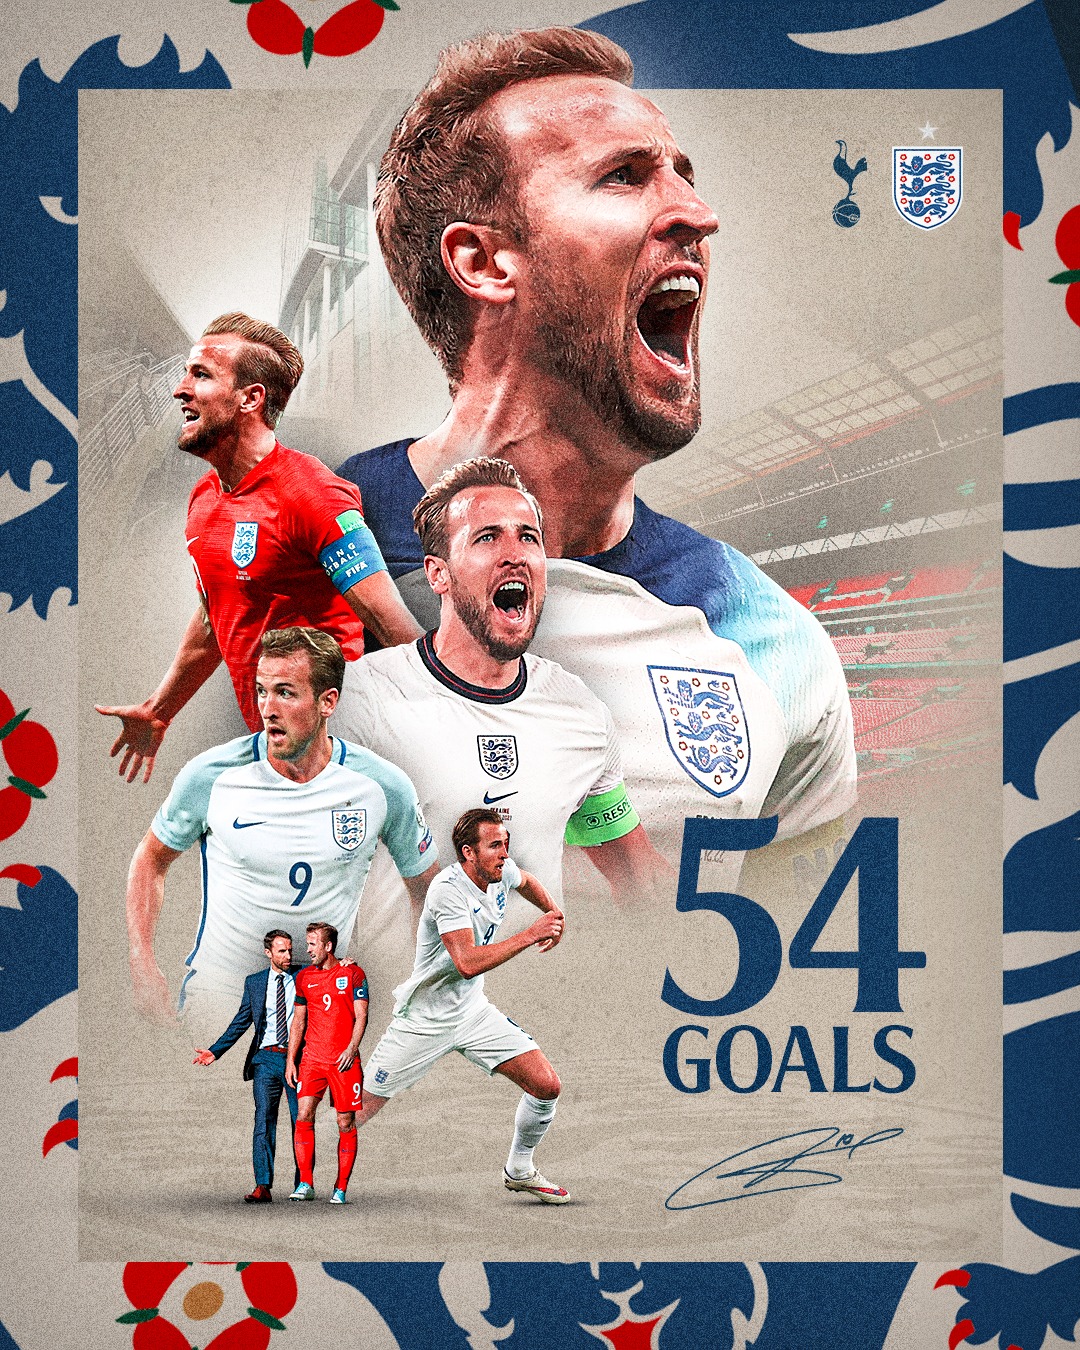 England’s new record scorer told time right for Tottenham exit by Steven Gerrard after greatest achievement ~ Football vows